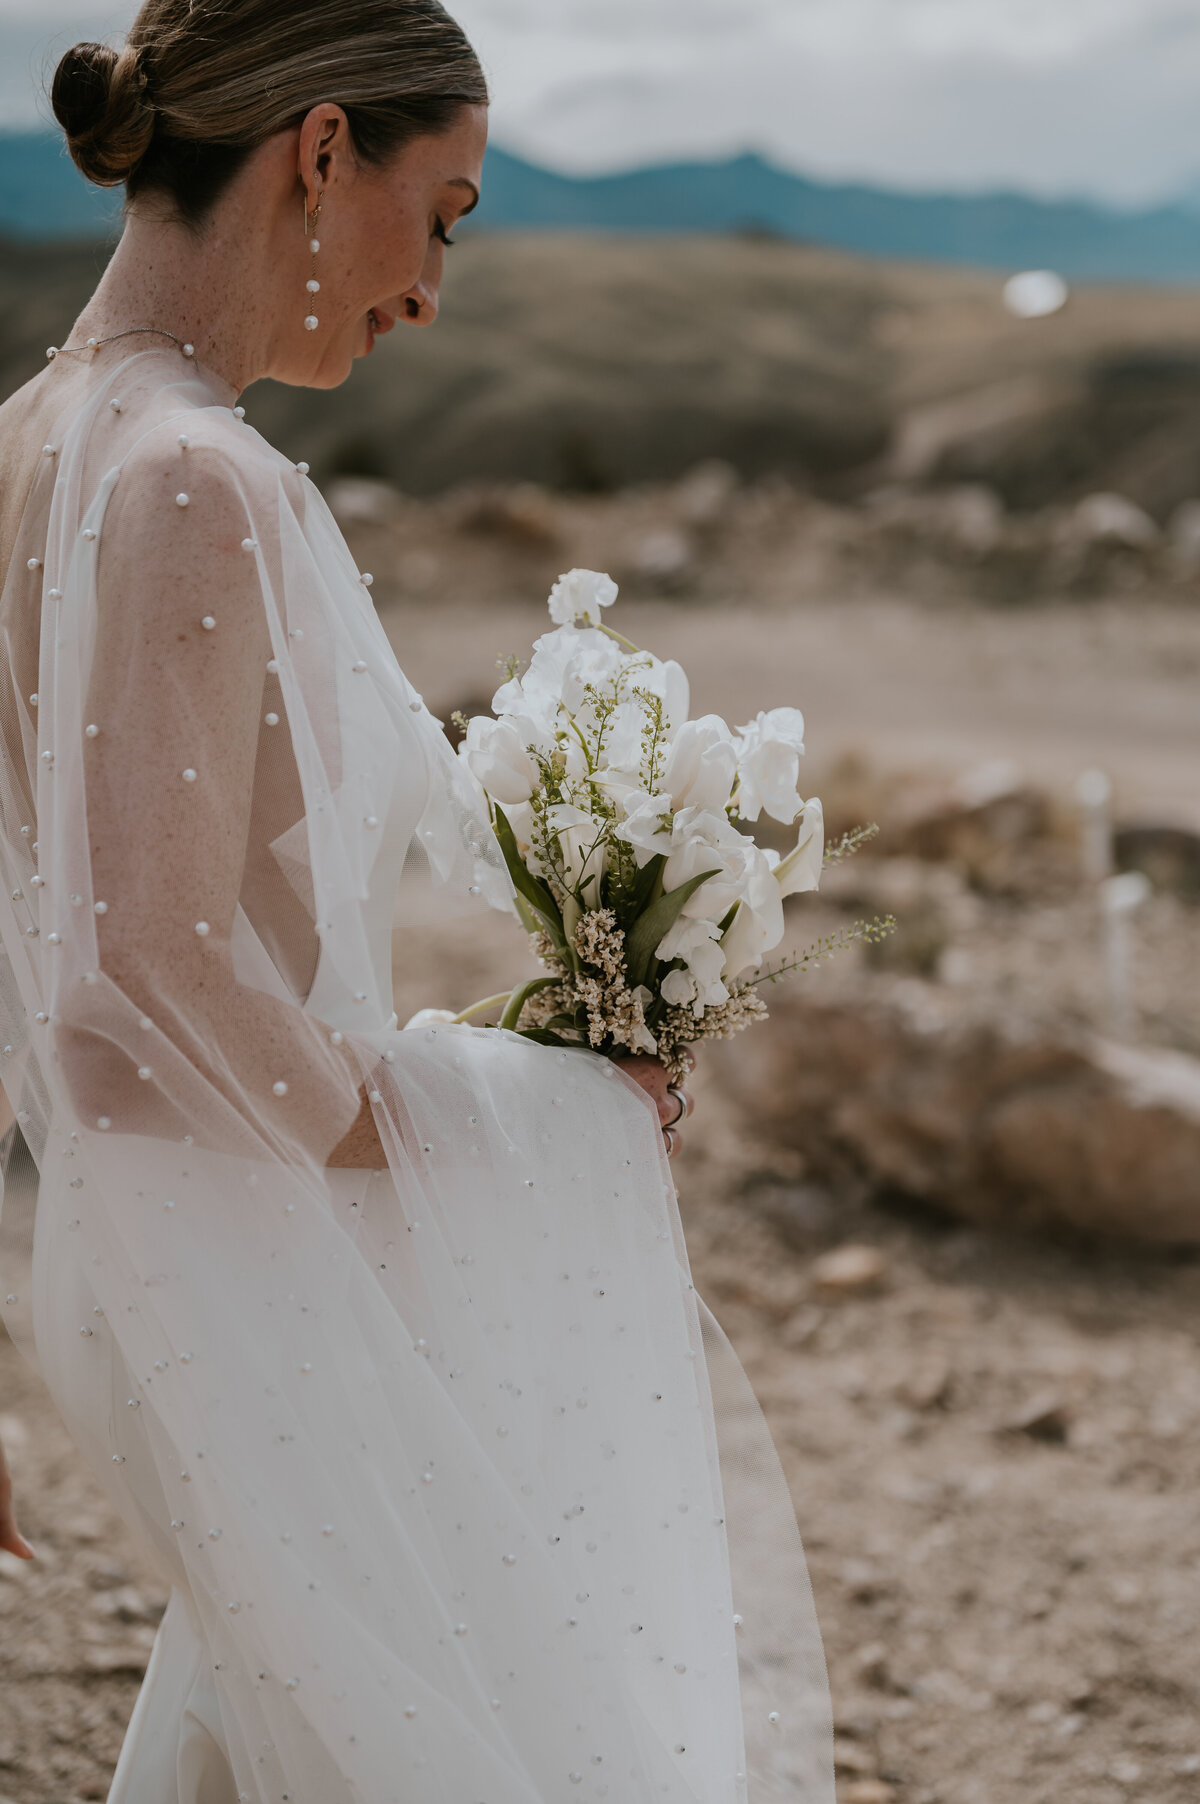 Wedding dress bridal and spa nontraditional, veil, destination, elopement in Wyoming near Yellowstone bouquet